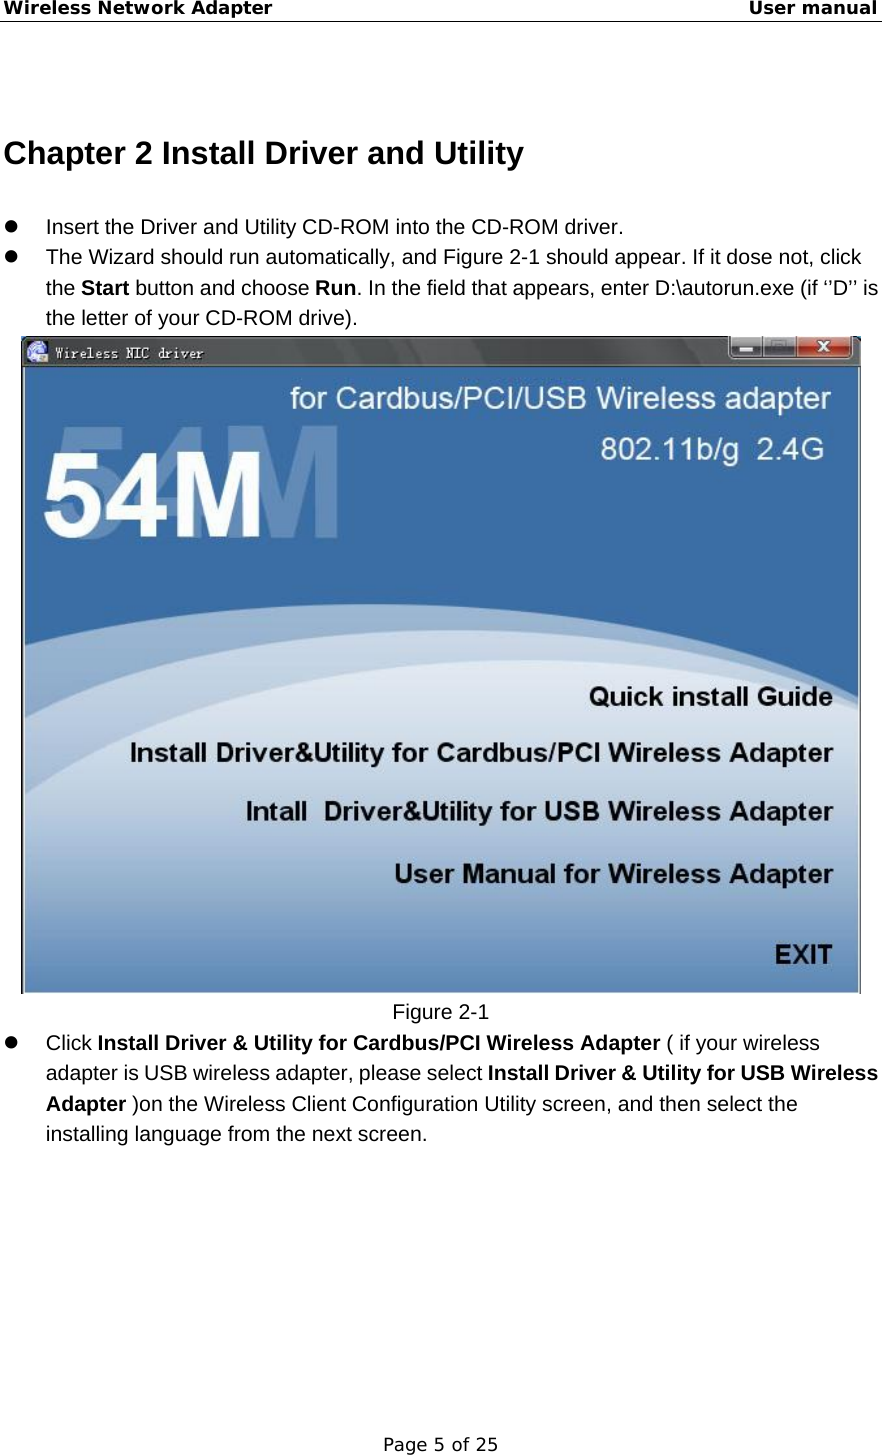 Wireless Network Adapter                                                    User manual Page 5 of 25  Chapter 2 Install Driver and Utility z  Insert the Driver and Utility CD-ROM into the CD-ROM driver. z  The Wizard should run automatically, and Figure 2-1 should appear. If it dose not, click the Start button and choose Run. In the field that appears, enter D:\autorun.exe (if ‘’D’’ is the letter of your CD-ROM drive).  Figure 2-1 z Click Install Driver &amp; Utility for Cardbus/PCI Wireless Adapter ( if your wireless adapter is USB wireless adapter, please select Install Driver &amp; Utility for USB Wireless Adapter )on the Wireless Client Configuration Utility screen, and then select the installing language from the next screen. 